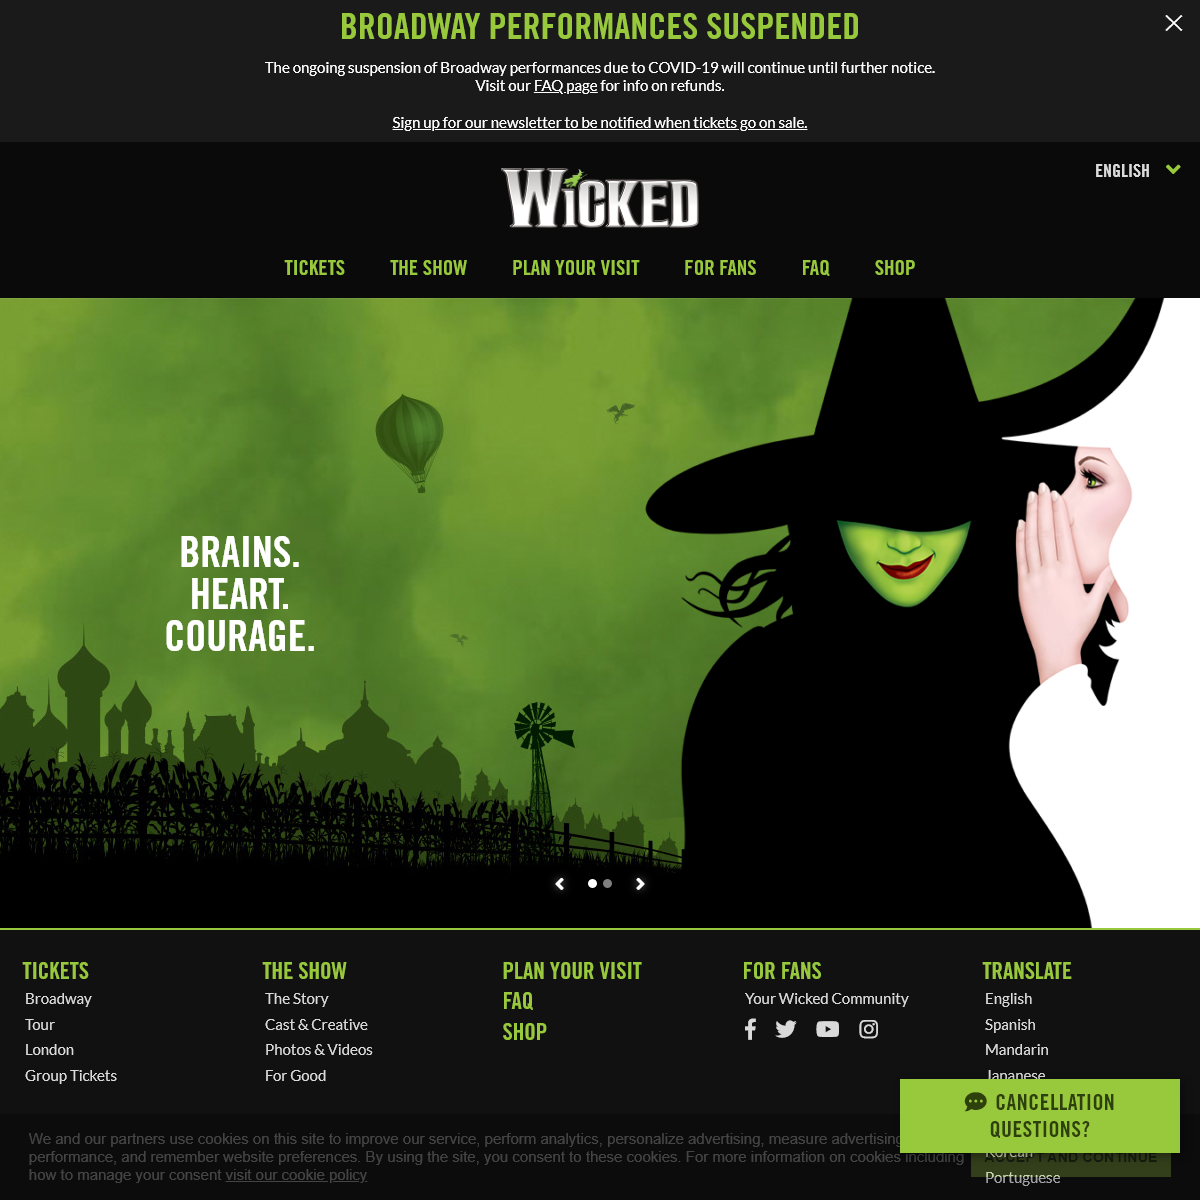 A complete backup of wickedthemusical.com